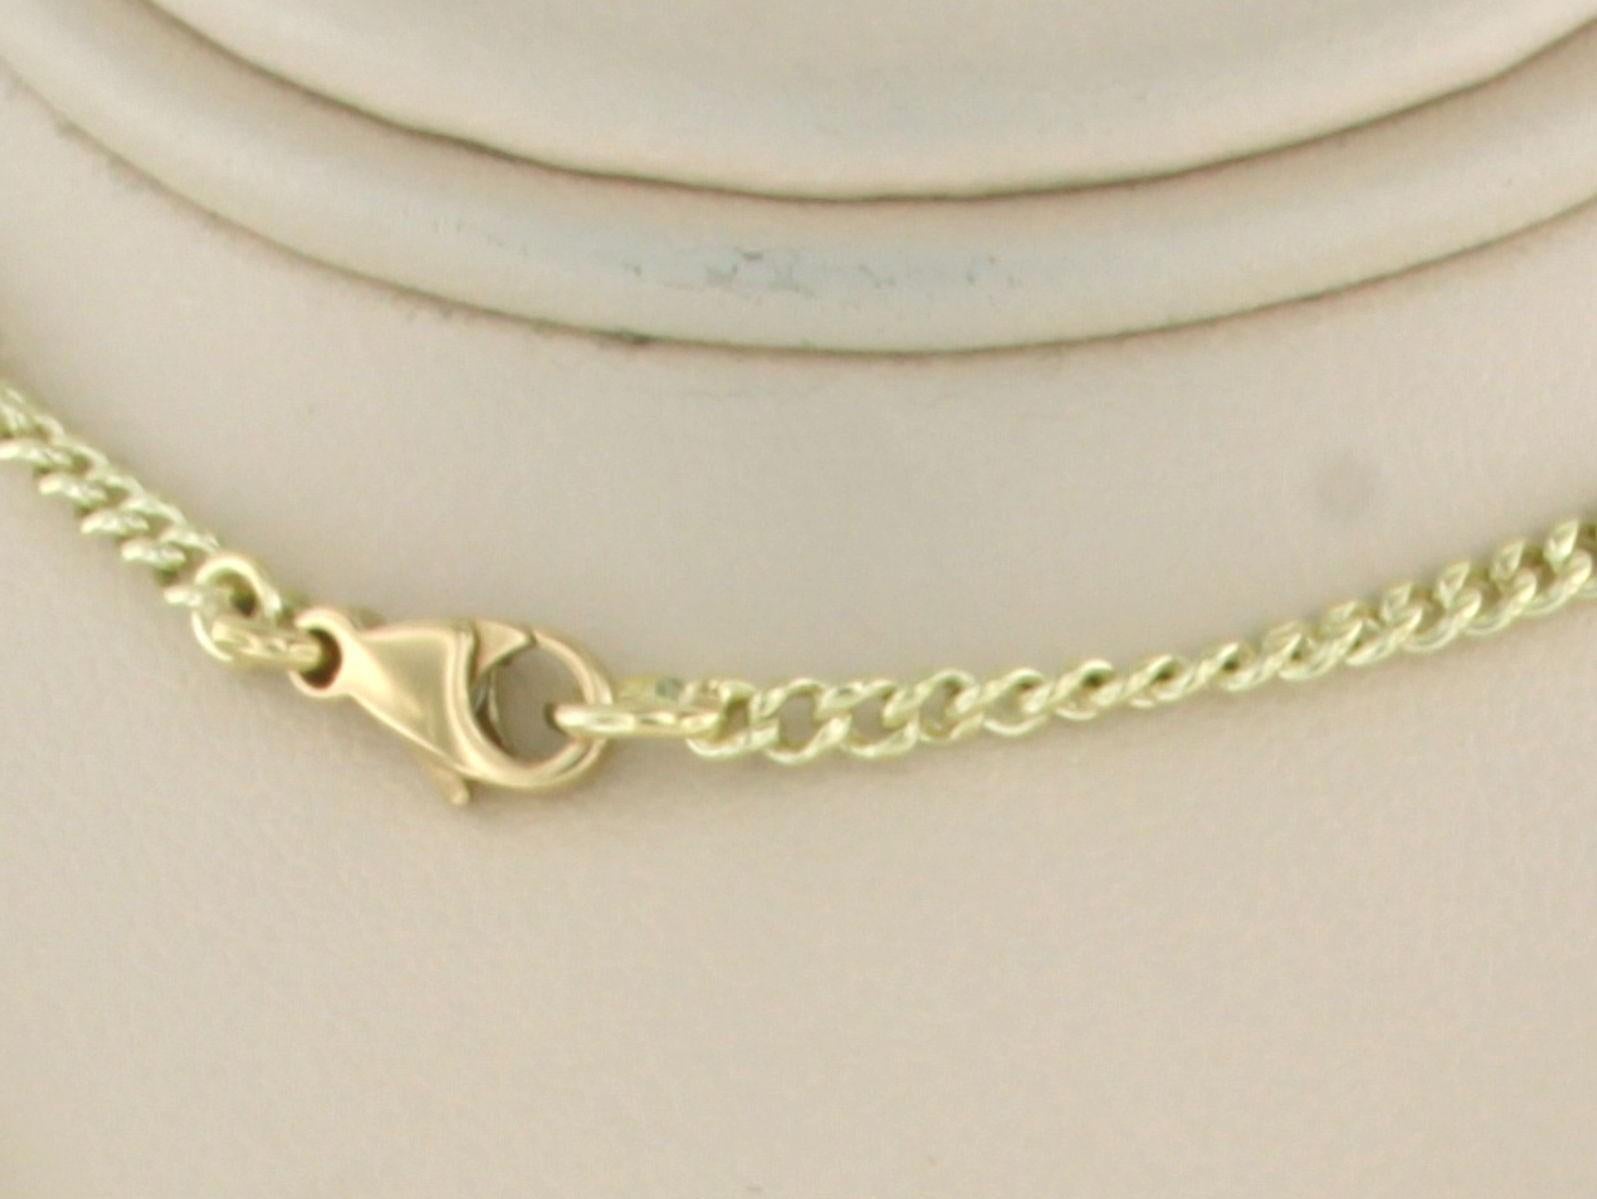 14k yellow gold necklace - 45 cm long - 8.7 gram For Sale 2